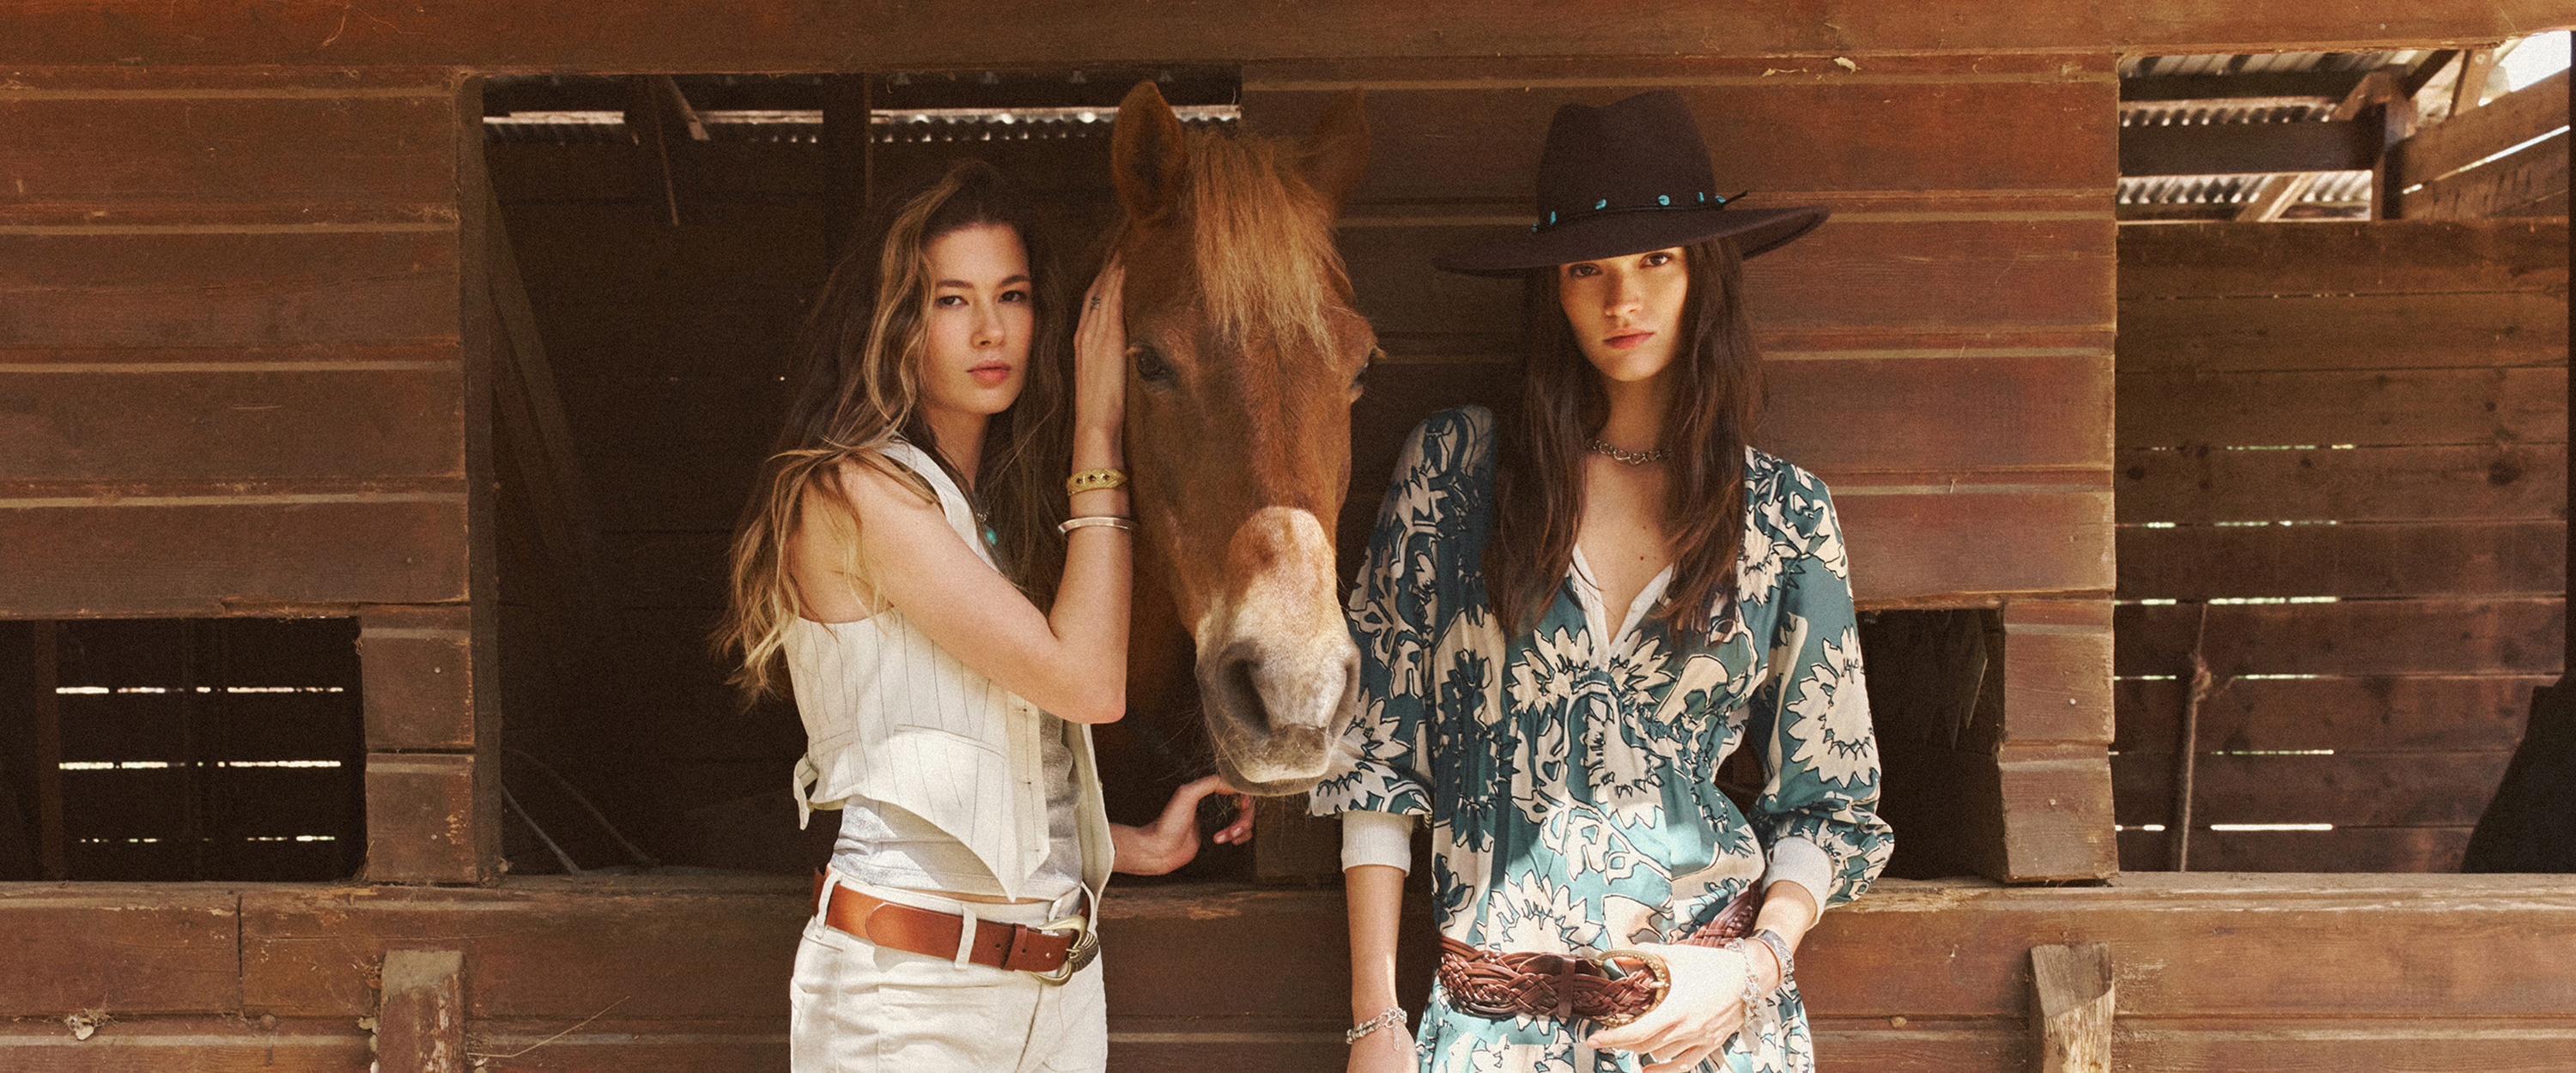 ba&sh new collection, The new western, western inspired looks, long printed dresses, denim, leather boots